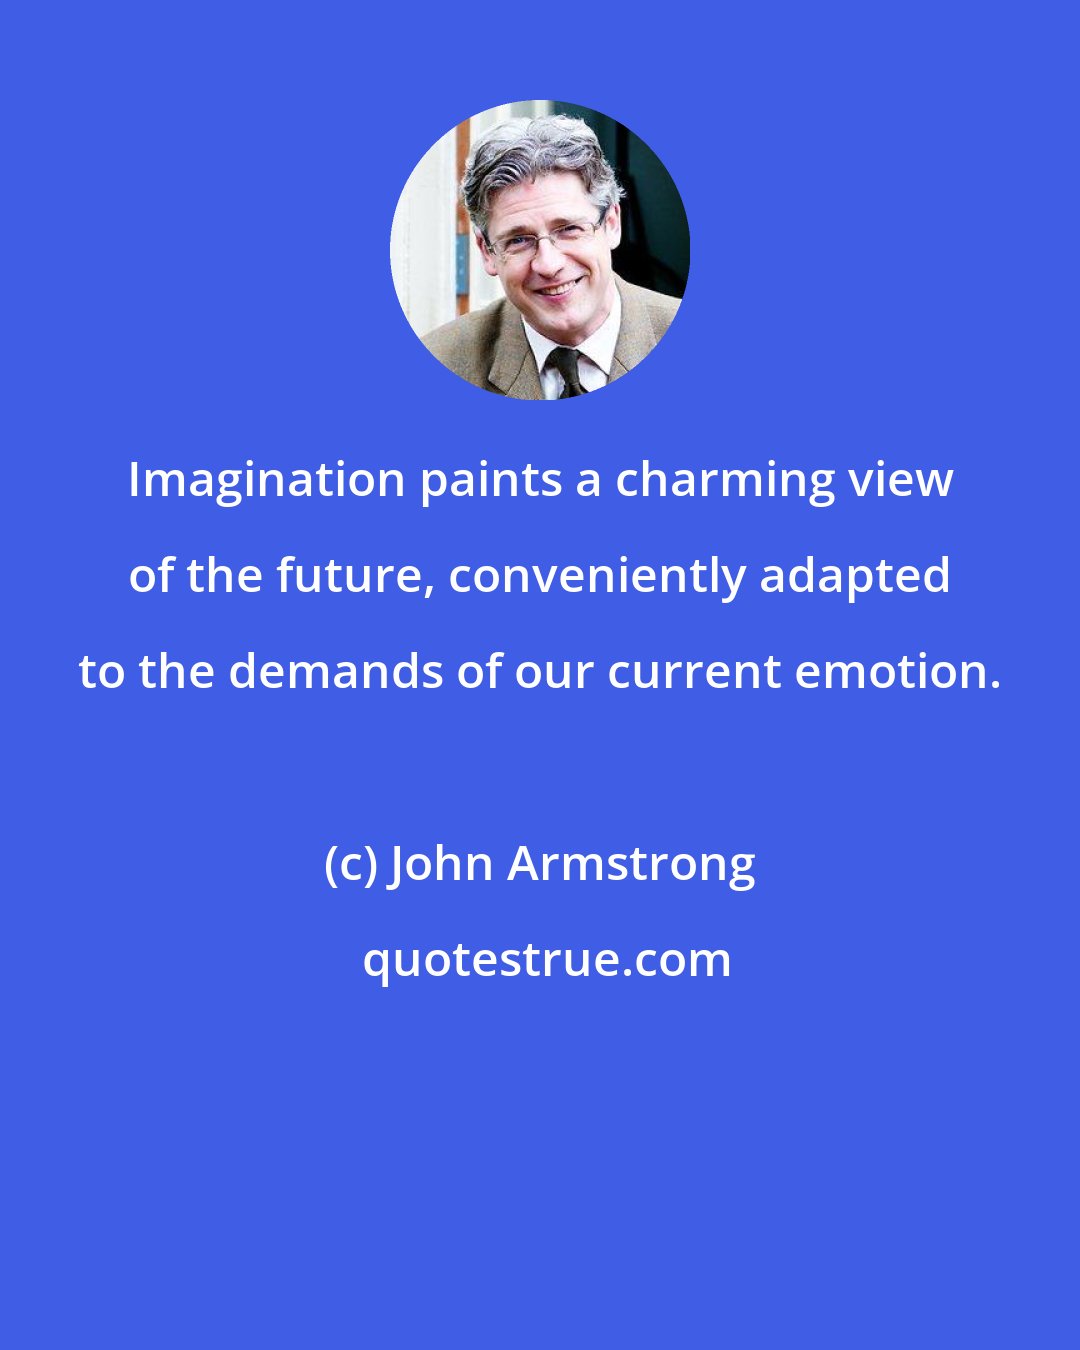 John Armstrong: Imagination paints a charming view of the future, conveniently adapted to the demands of our current emotion.